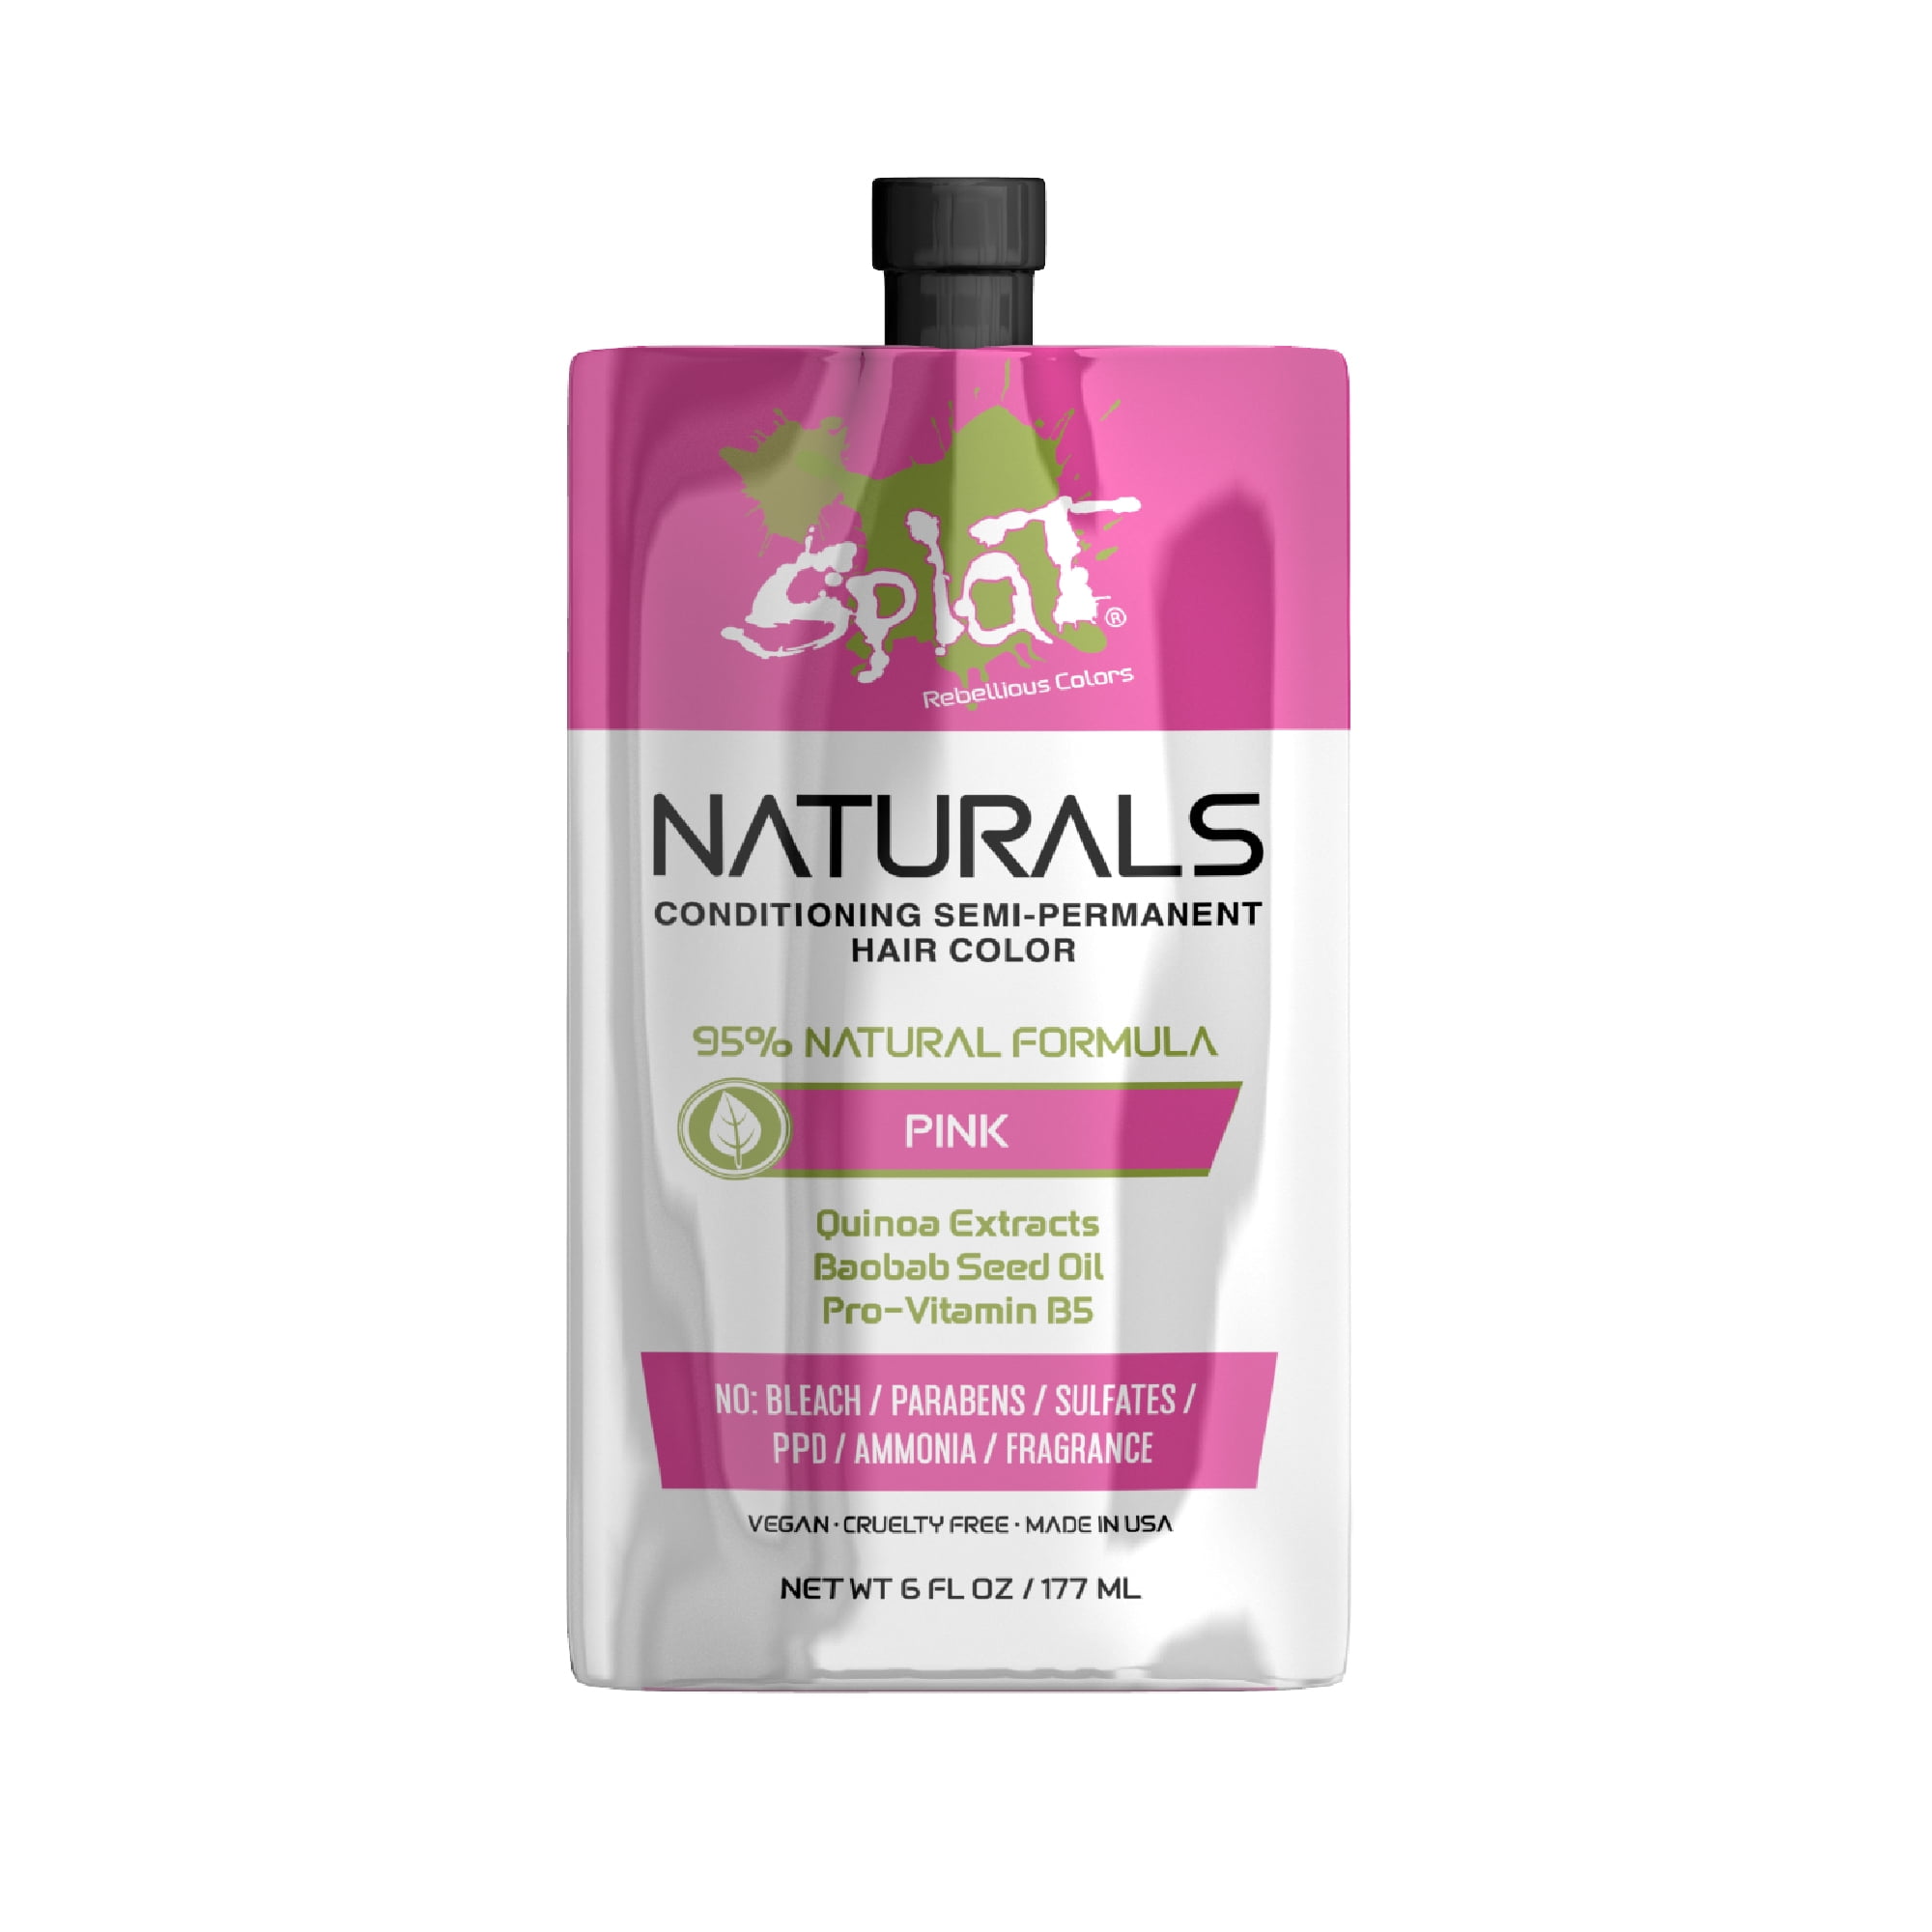 Splat Naturals Conditioning Hair Color, Semi-Permanent Hair Dye, Pink, 6 fl oz Pouch